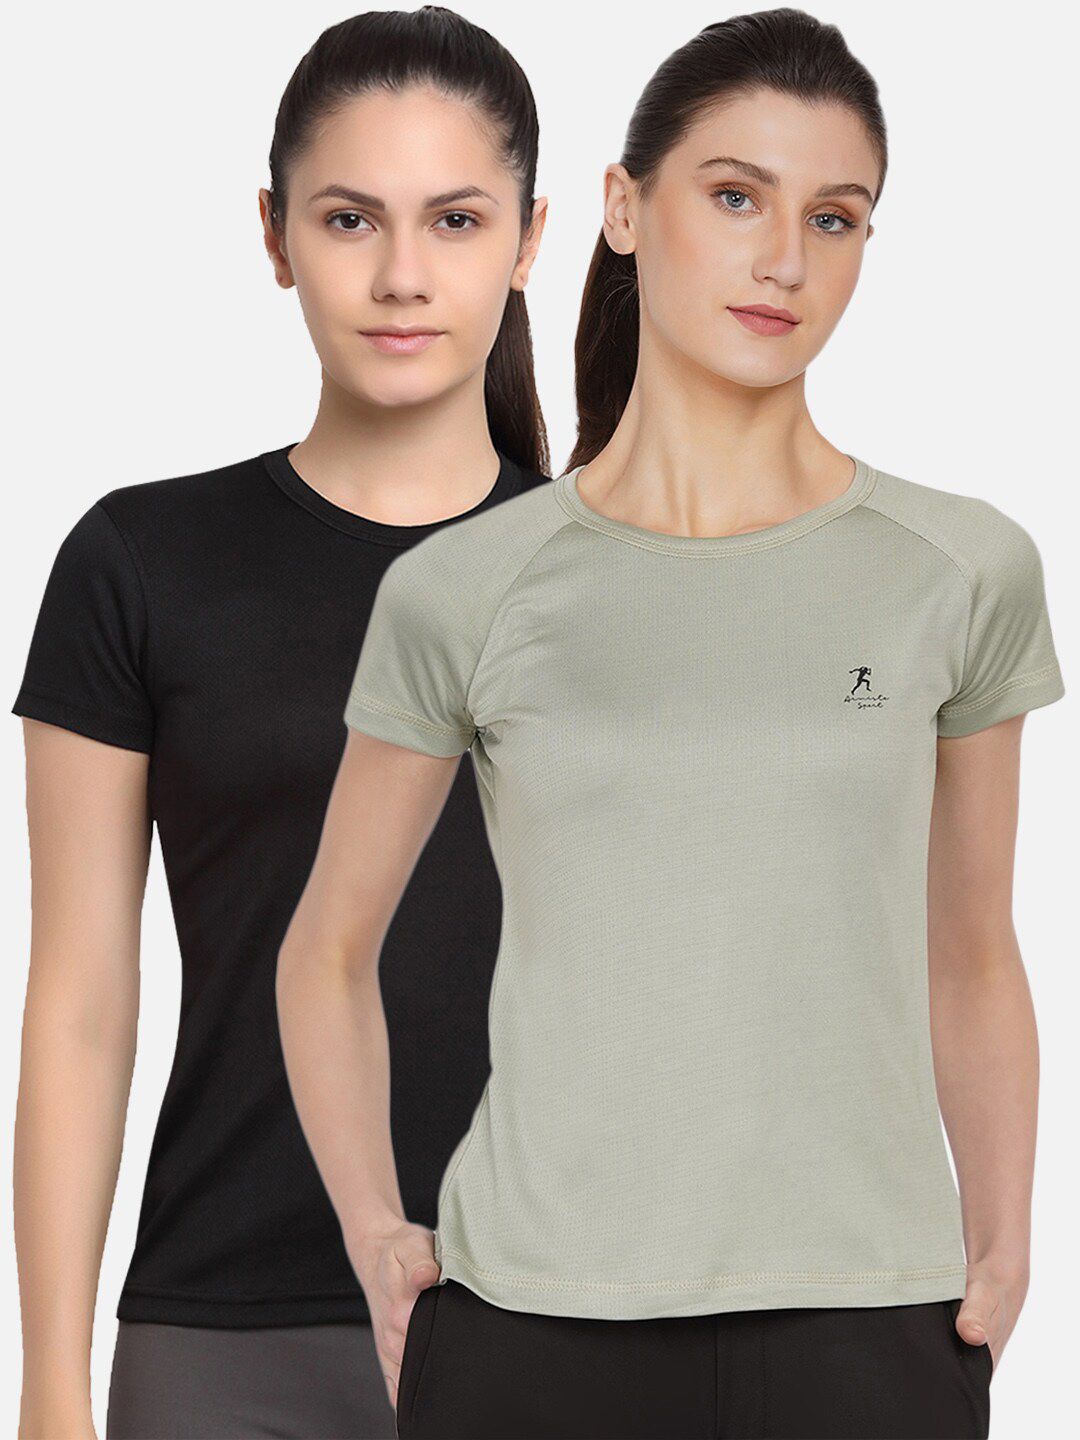 ARMISTO Women Pack of 2 Dri-FIT Slim Fit Training or Gym T-shirts Price in India